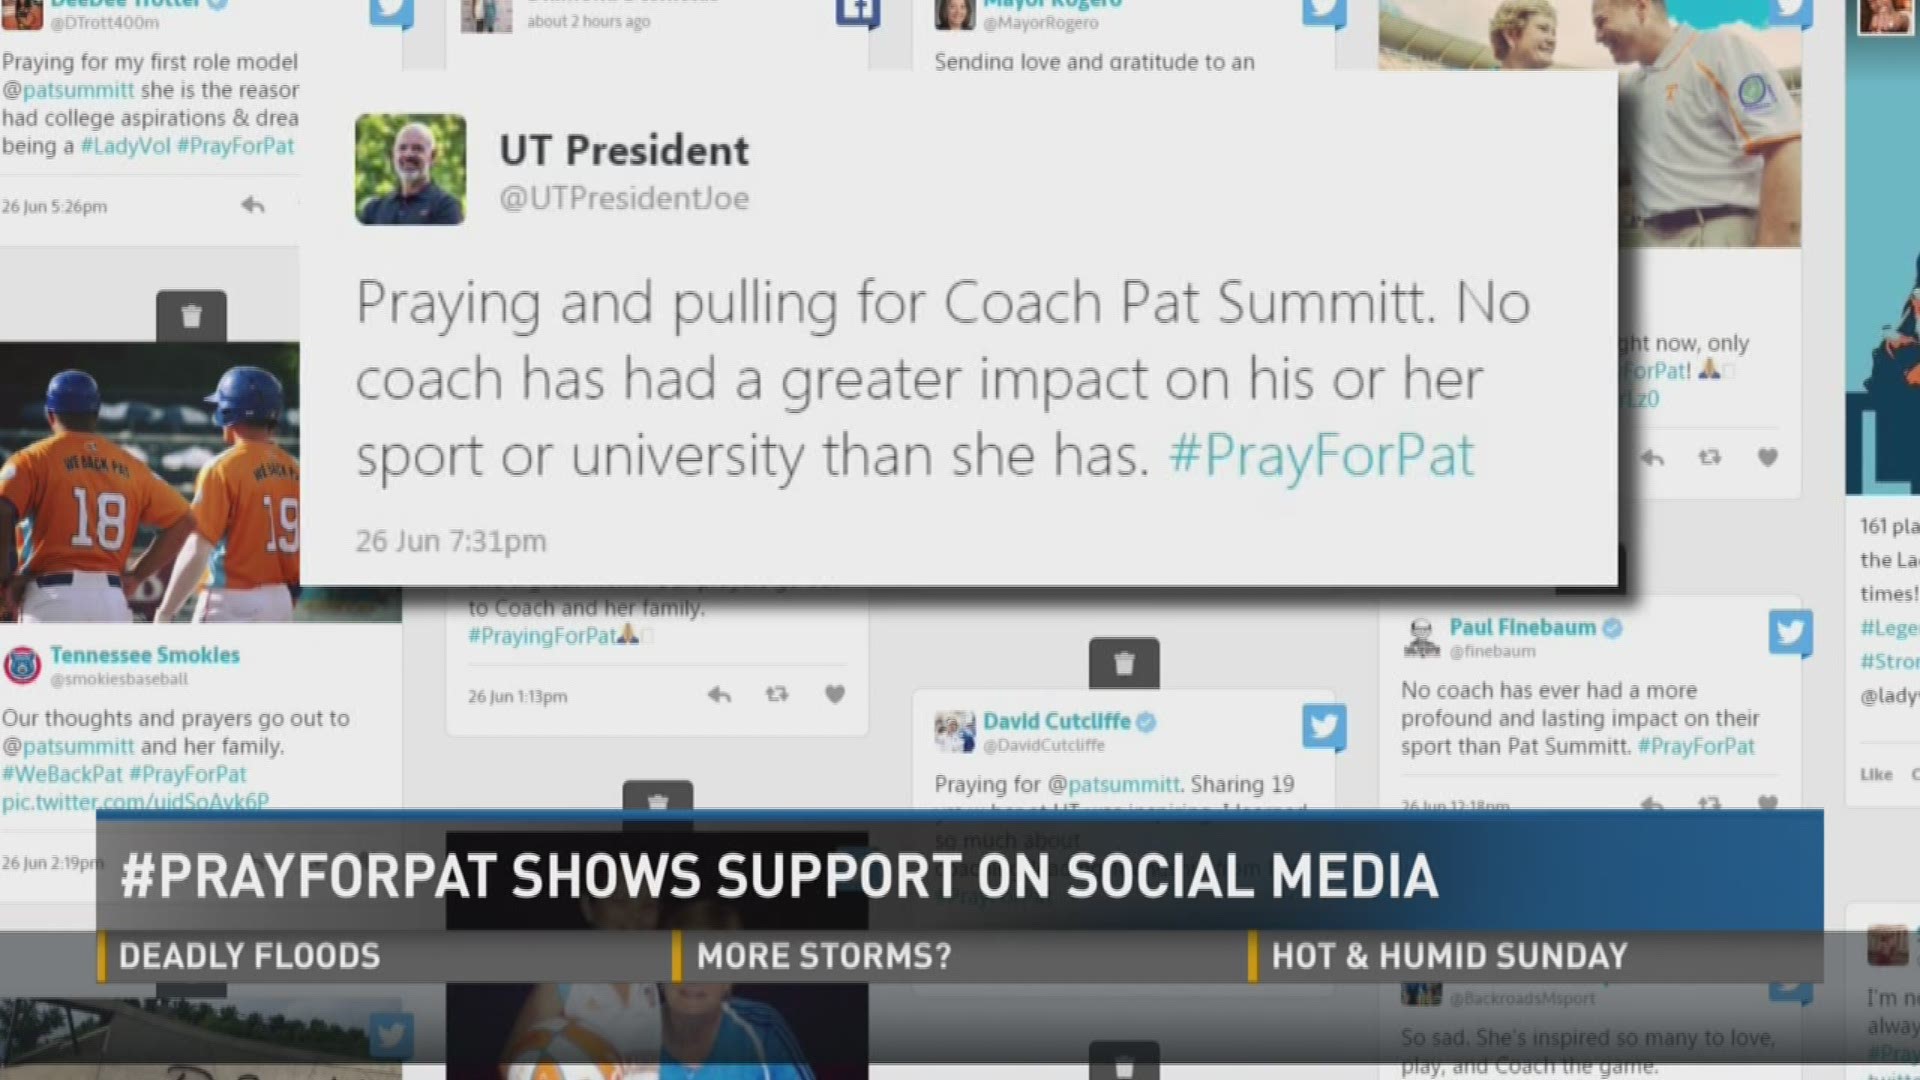 Thousands of people have shown their support for former UT Lady Vols Coach Pat Summitt on social media this weekend.